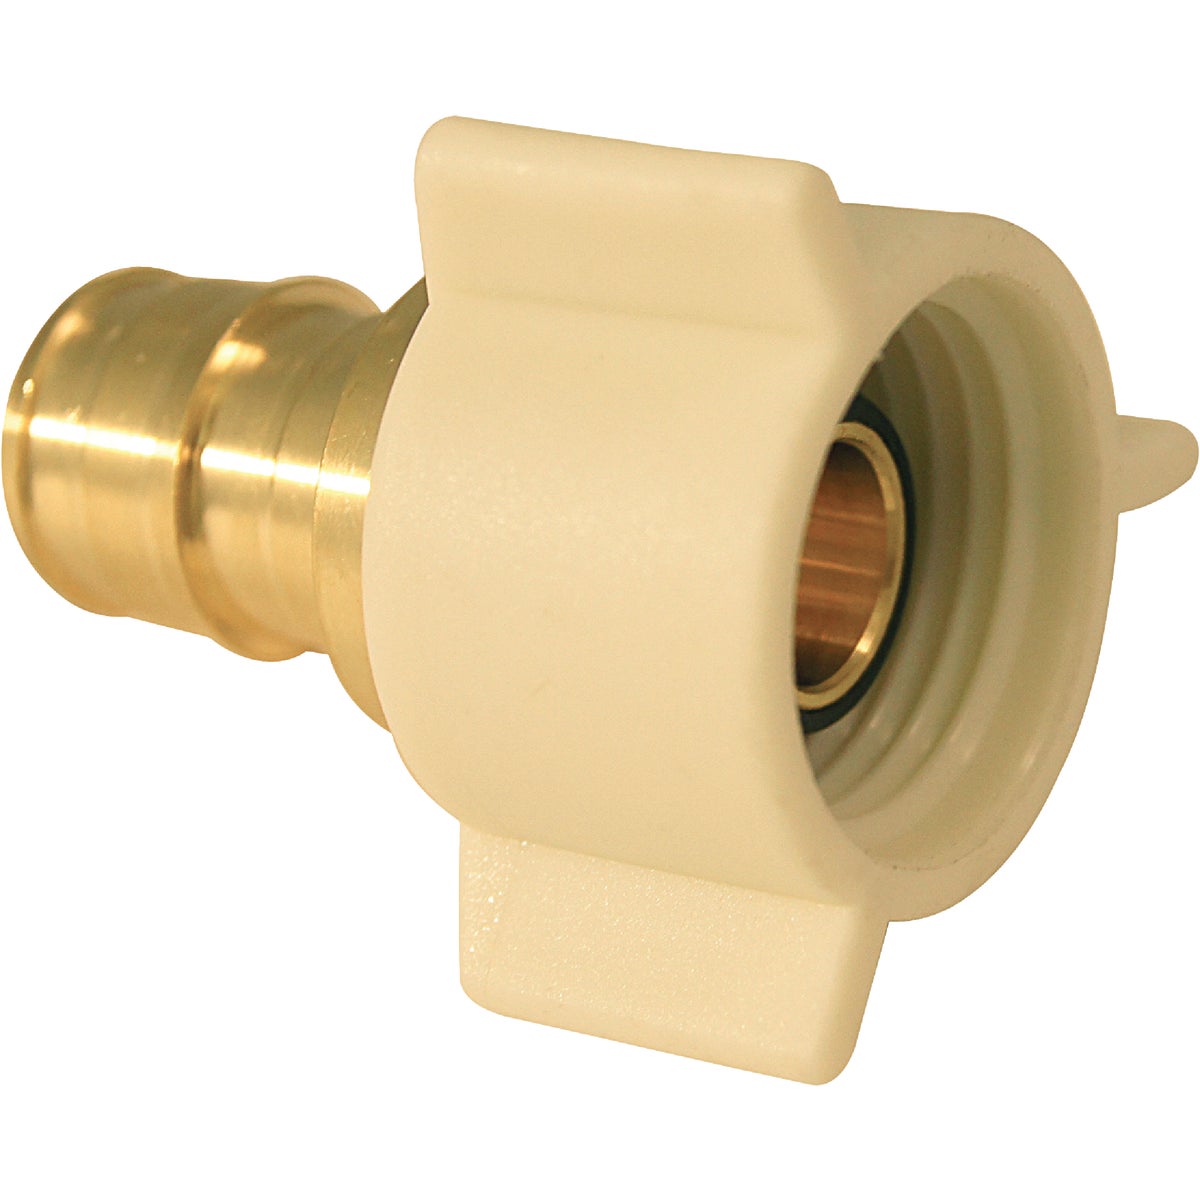 Apollo Retail 1 In. x 1 In. Brass Insert Fitting FIP PEX A Adapter